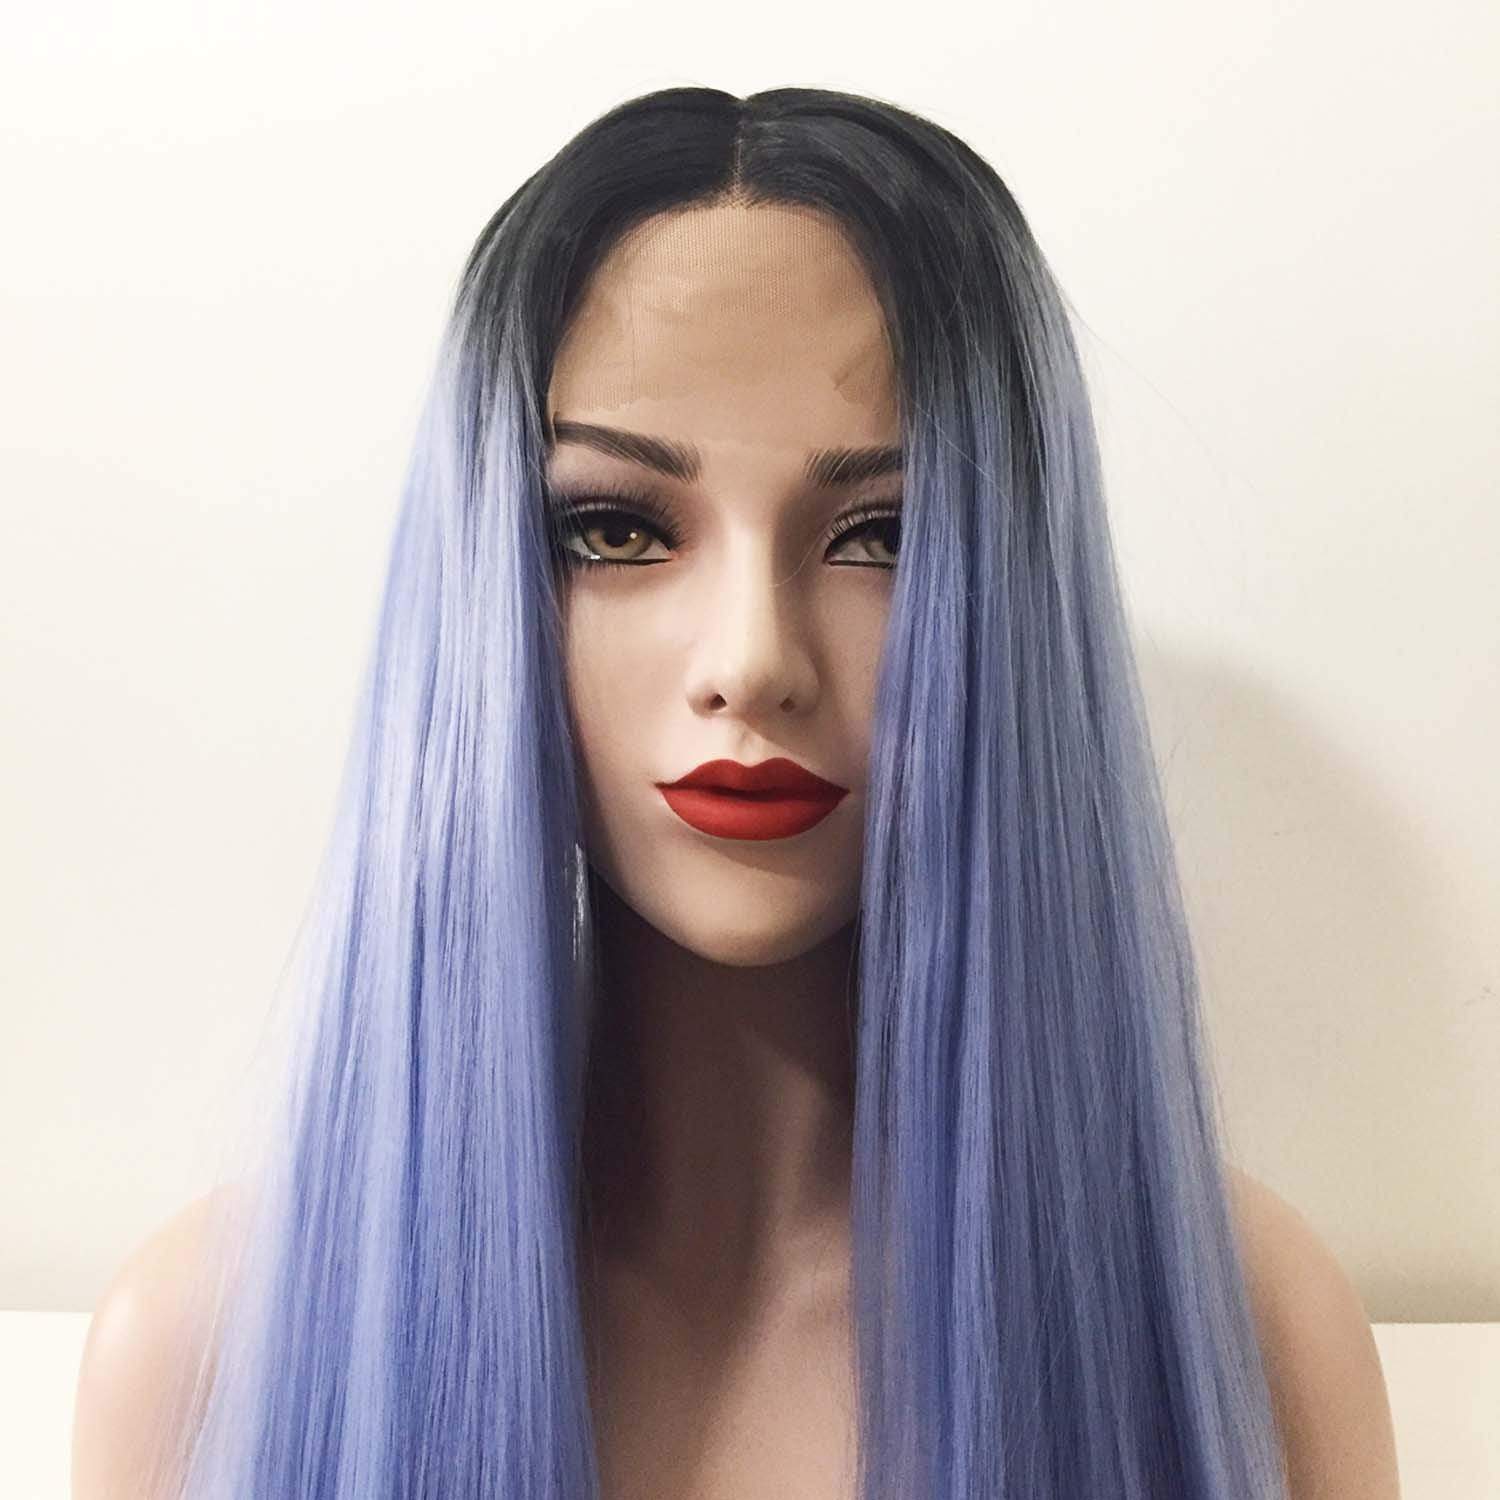 nevermindyrhead Women Lace Front Ombre Light Blue Dark Root Black Middle Part Long Hair Wig